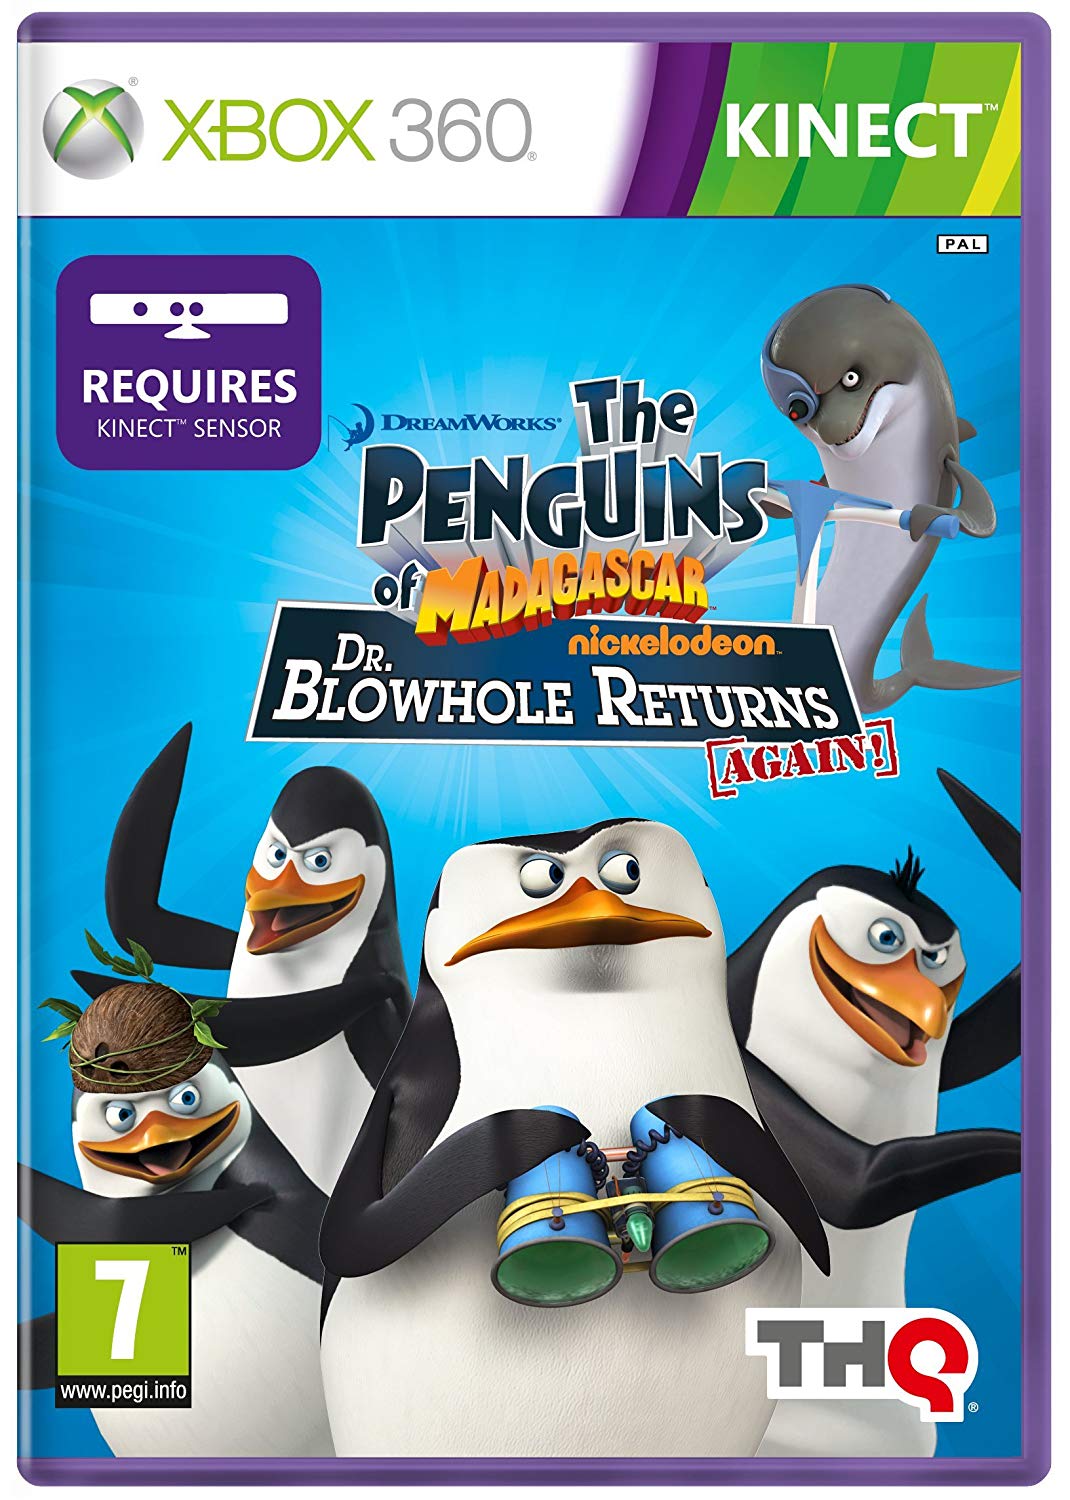 Dreamworks Nickelodeon The Penguins of Madagascar Dr Blowhole Returns Again (Kinect)